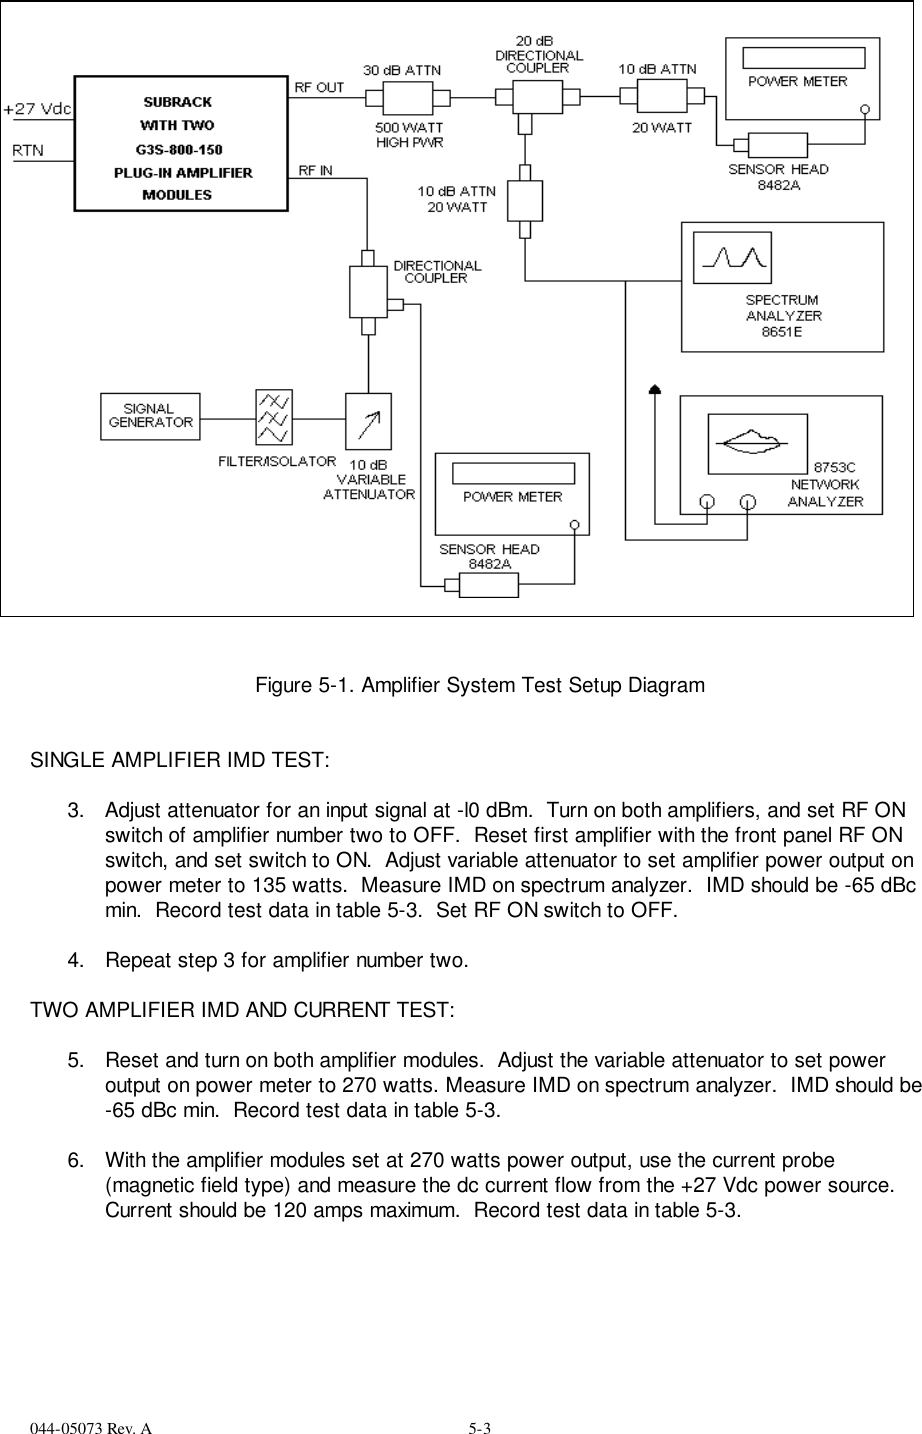 044-05073 Rev. A 5-3Figure 5-1. Amplifier System Test Setup DiagramSINGLE AMPLIFIER IMD TEST:3.  Adjust attenuator for an input signal at -l0 dBm.  Turn on both amplifiers, and set RF ONswitch of amplifier number two to OFF.  Reset first amplifier with the front panel RF ONswitch, and set switch to ON.  Adjust variable attenuator to set amplifier power output onpower meter to 135 watts.  Measure IMD on spectrum analyzer.  IMD should be -65 dBcmin.  Record test data in table 5-3.  Set RF ON switch to OFF. 4.  Repeat step 3 for amplifier number two. TWO AMPLIFIER IMD AND CURRENT TEST: 5.  Reset and turn on both amplifier modules.  Adjust the variable attenuator to set poweroutput on power meter to 270 watts. Measure IMD on spectrum analyzer.  IMD should be-65 dBc min.  Record test data in table 5-3. 6.  With the amplifier modules set at 270 watts power output, use the current probe(magnetic field type) and measure the dc current flow from the +27 Vdc power source.Current should be 120 amps maximum.  Record test data in table 5-3. 